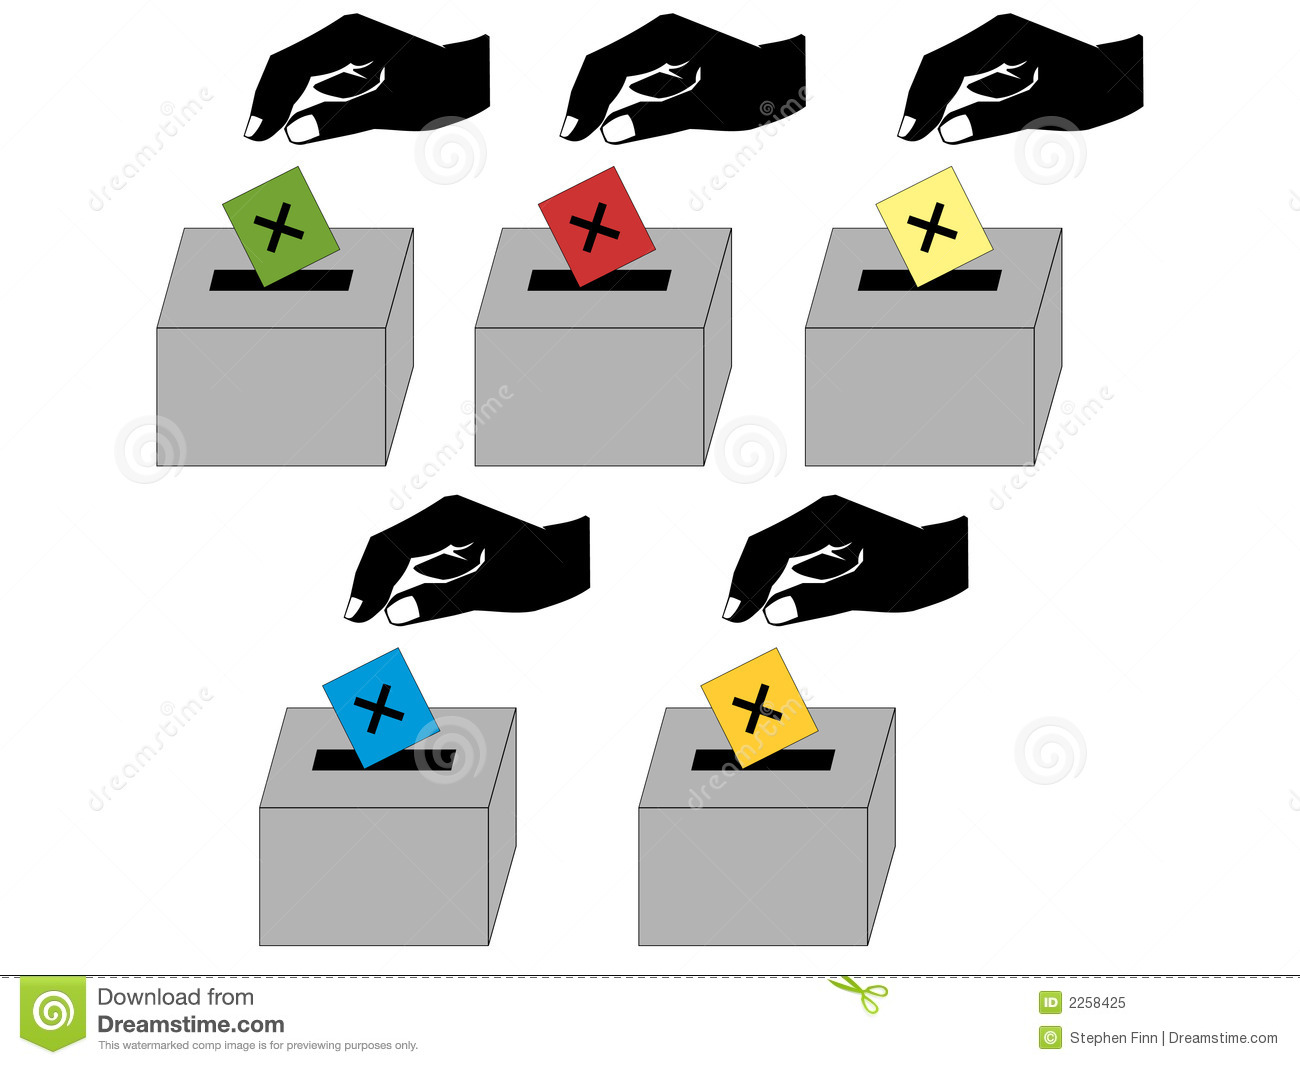 People Voting For British Political Parties Illustration